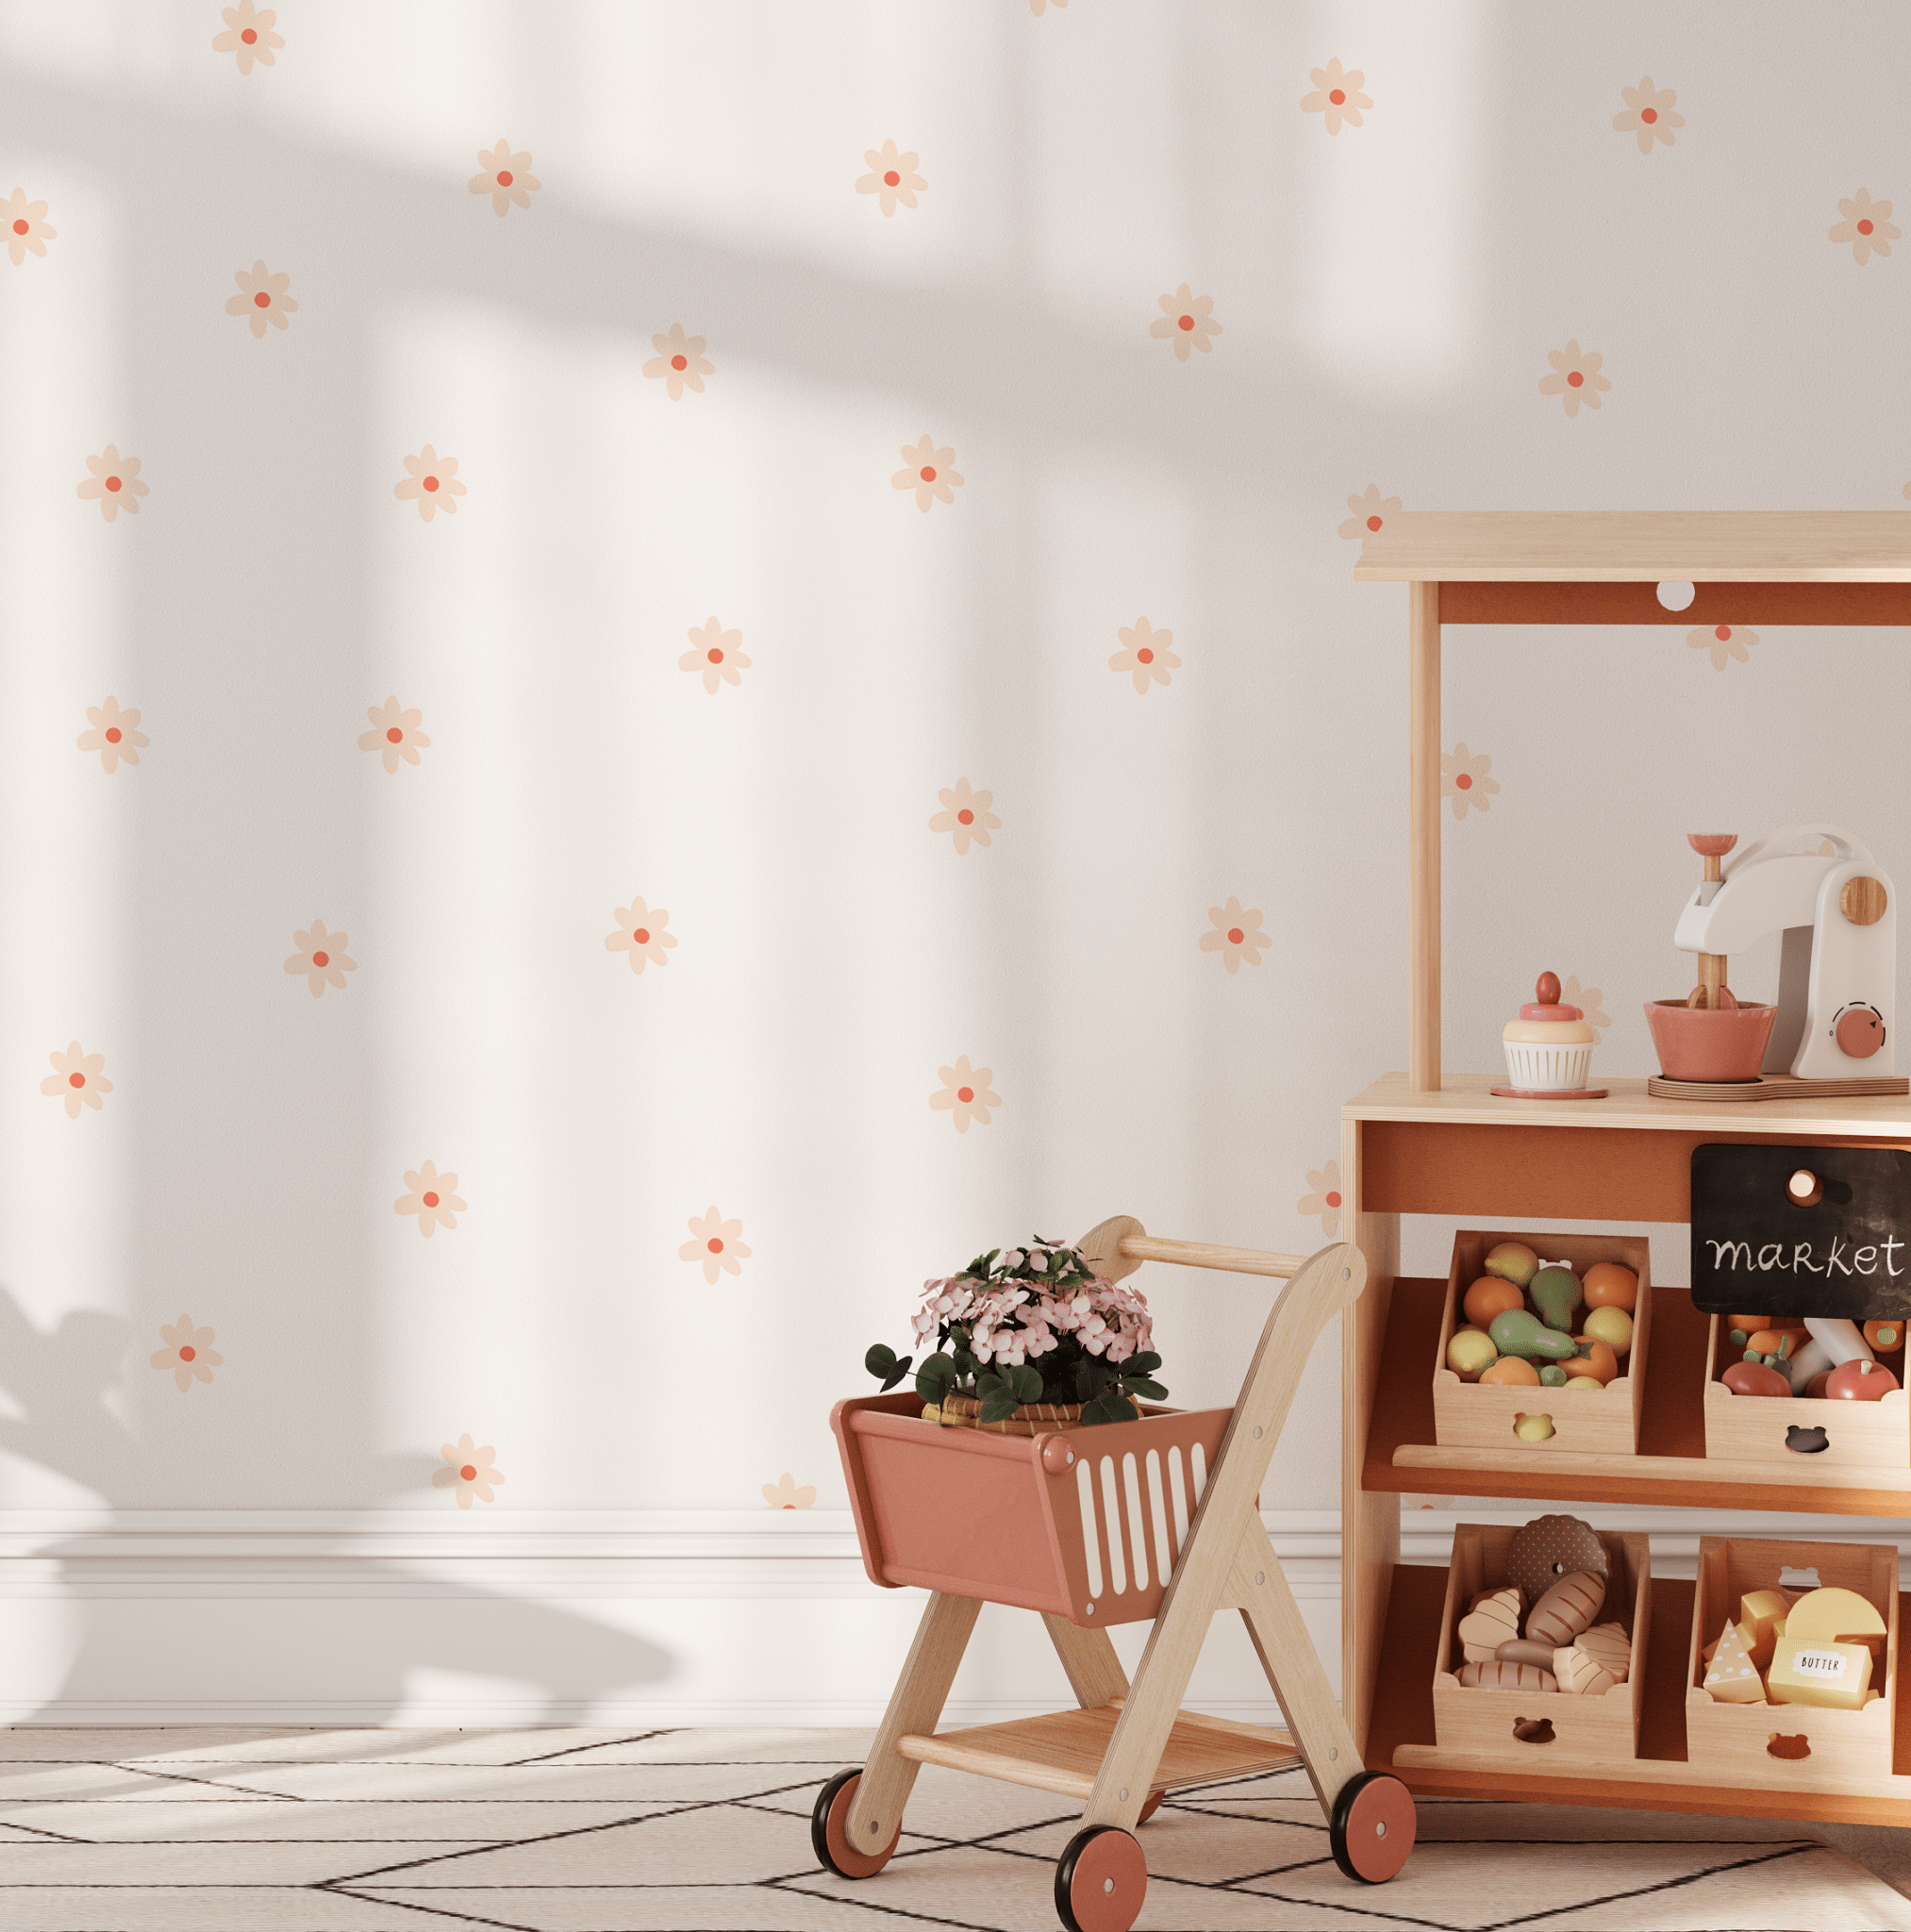 Small dainty floral daisy wall stickers in a child's play area